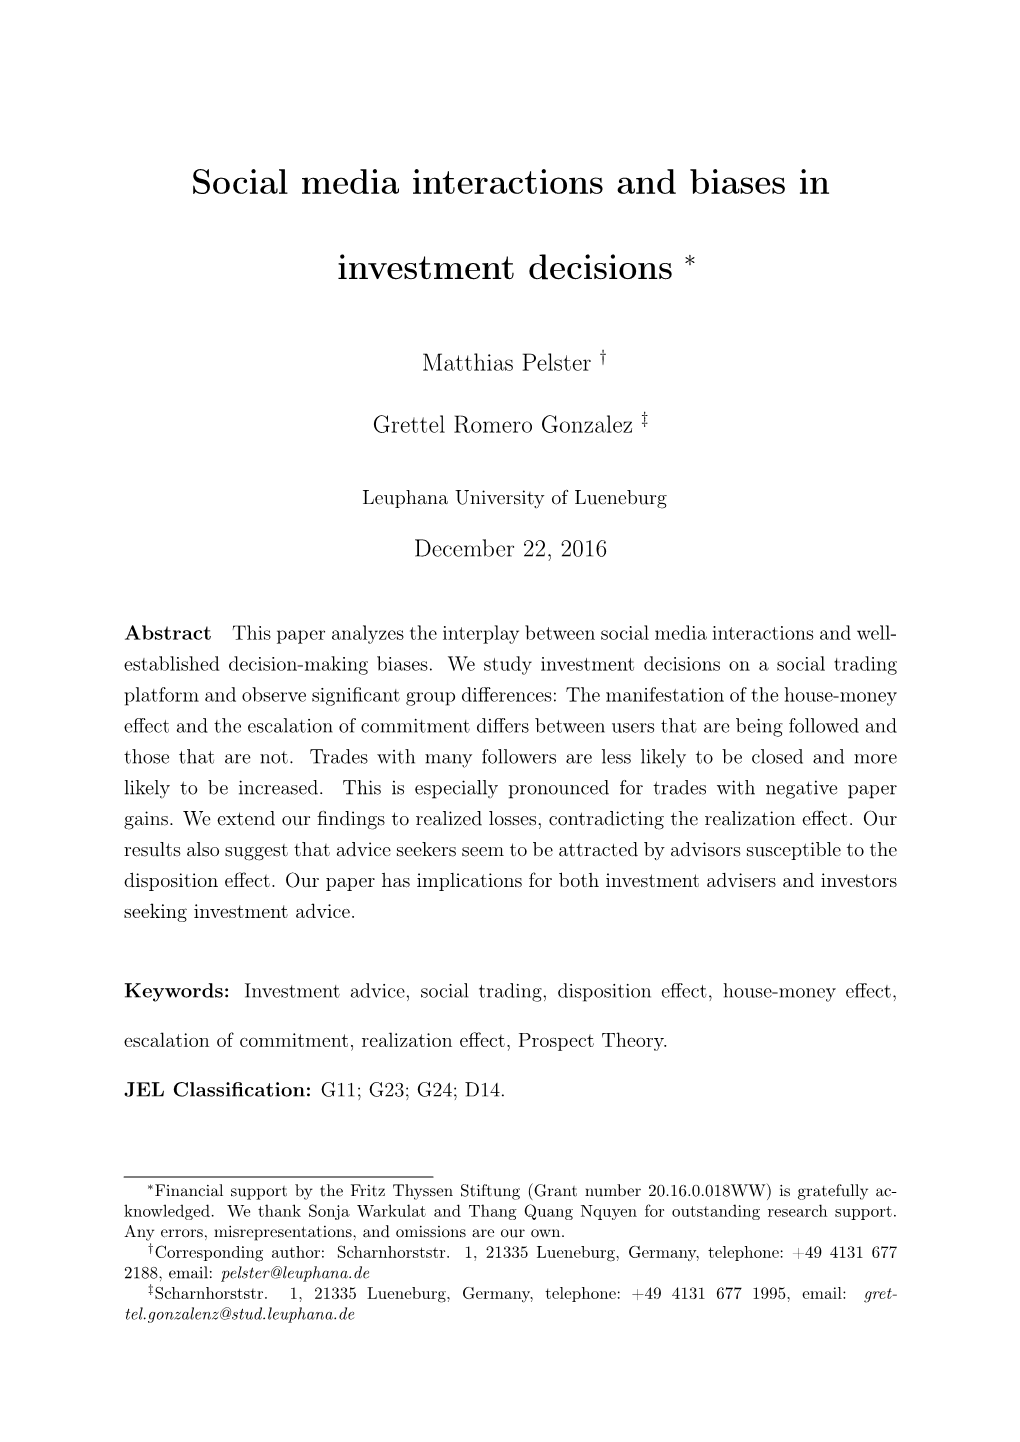 Social Media Interactions and Biases in Investment Decisions